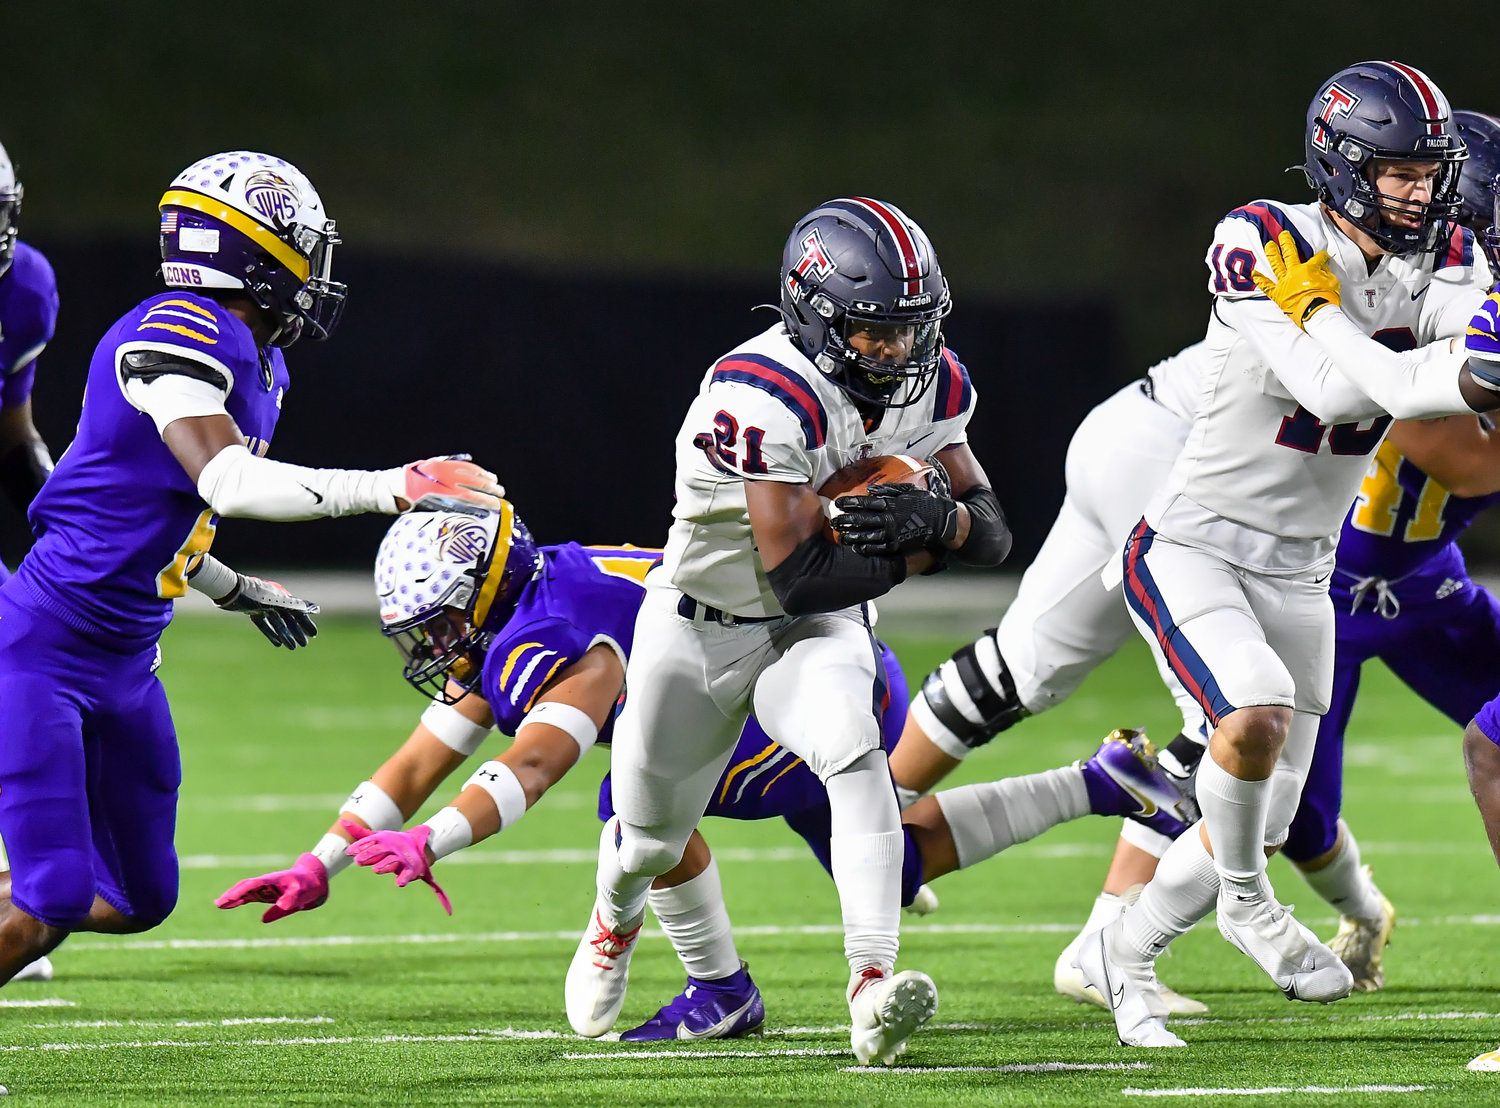 Houston Tx. Nov 19, 2021: Tompkins #21 Caleb Blocker rushes up the middle during the UIL area playoff game between Tompkins and Jersey Village at Pridgeon Stadium in Houston. (Photo by Mark Goodman / Katy Times)